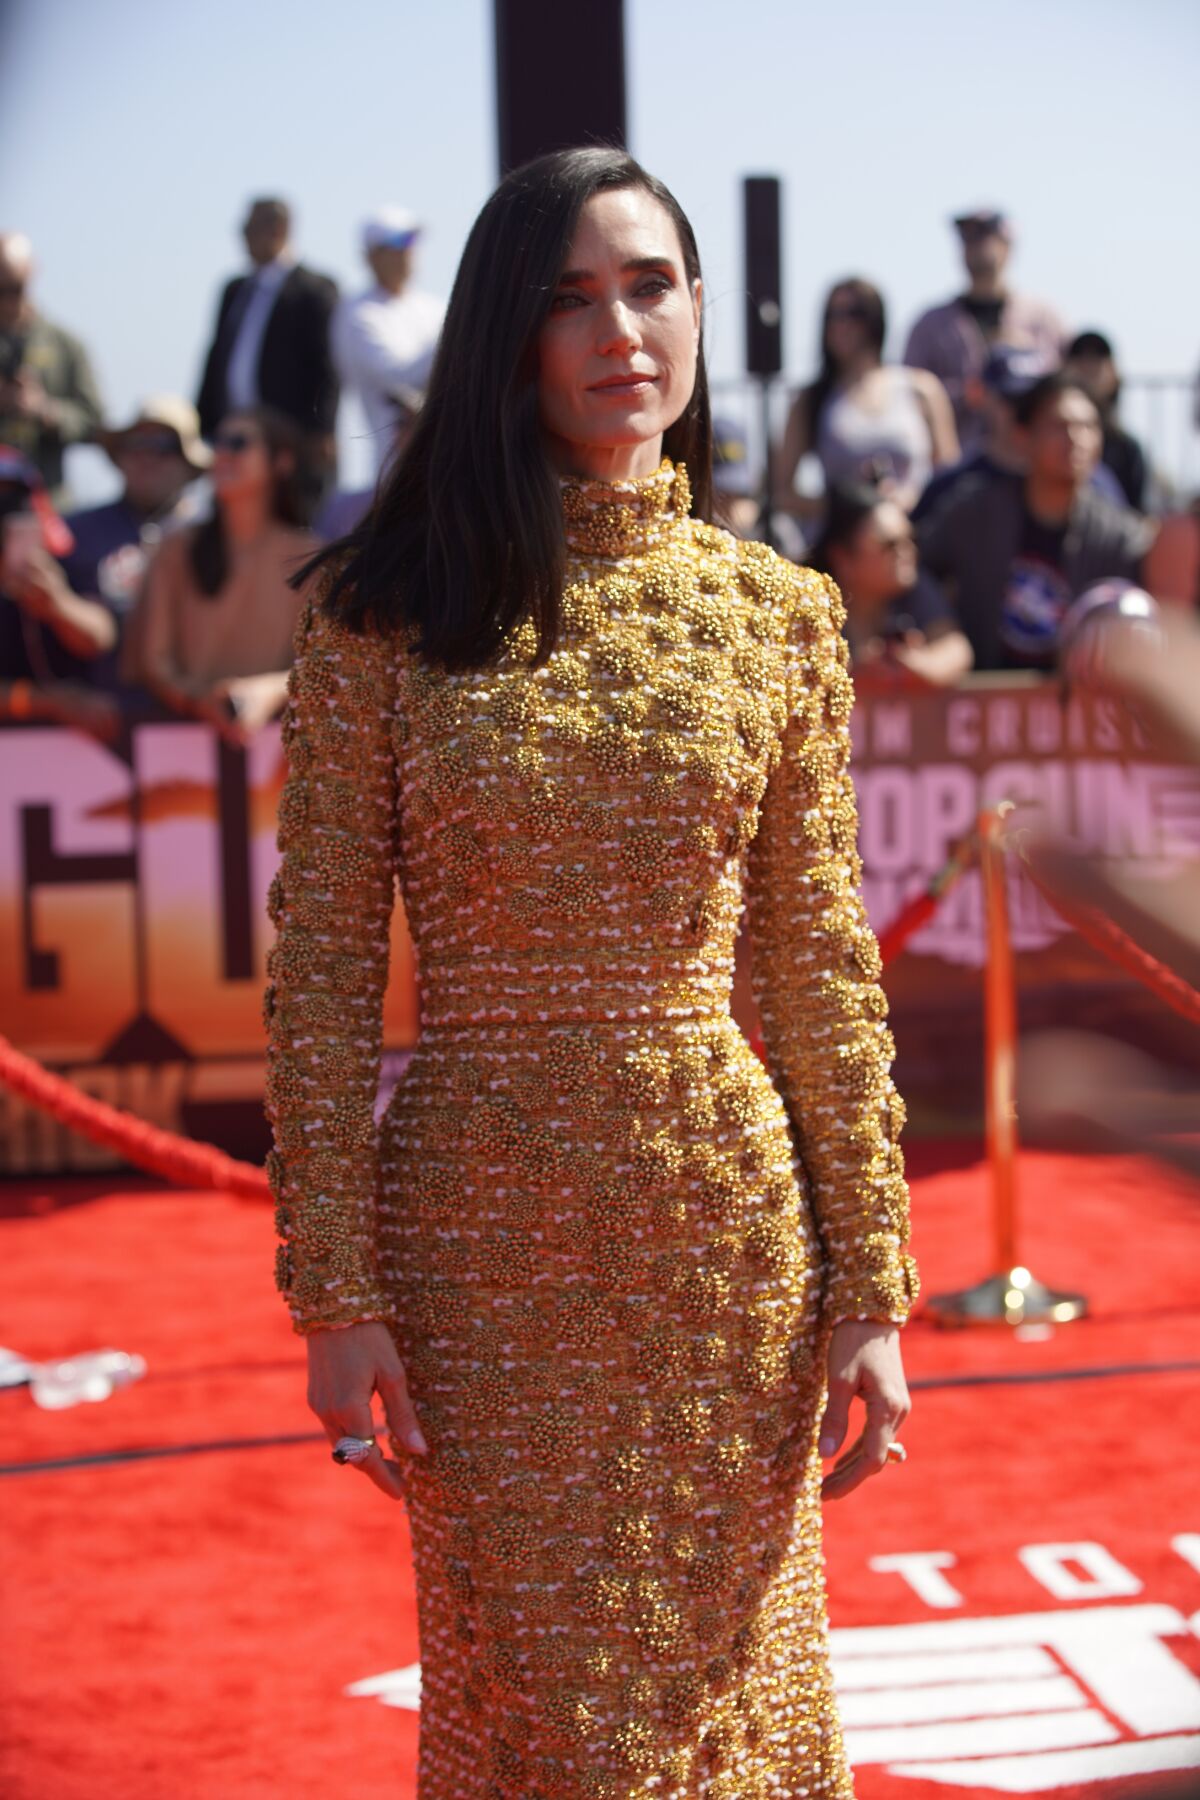 Jennifer Connelly who plays Penny Benjamin attends the global premiere of Top Gun: Maverick.